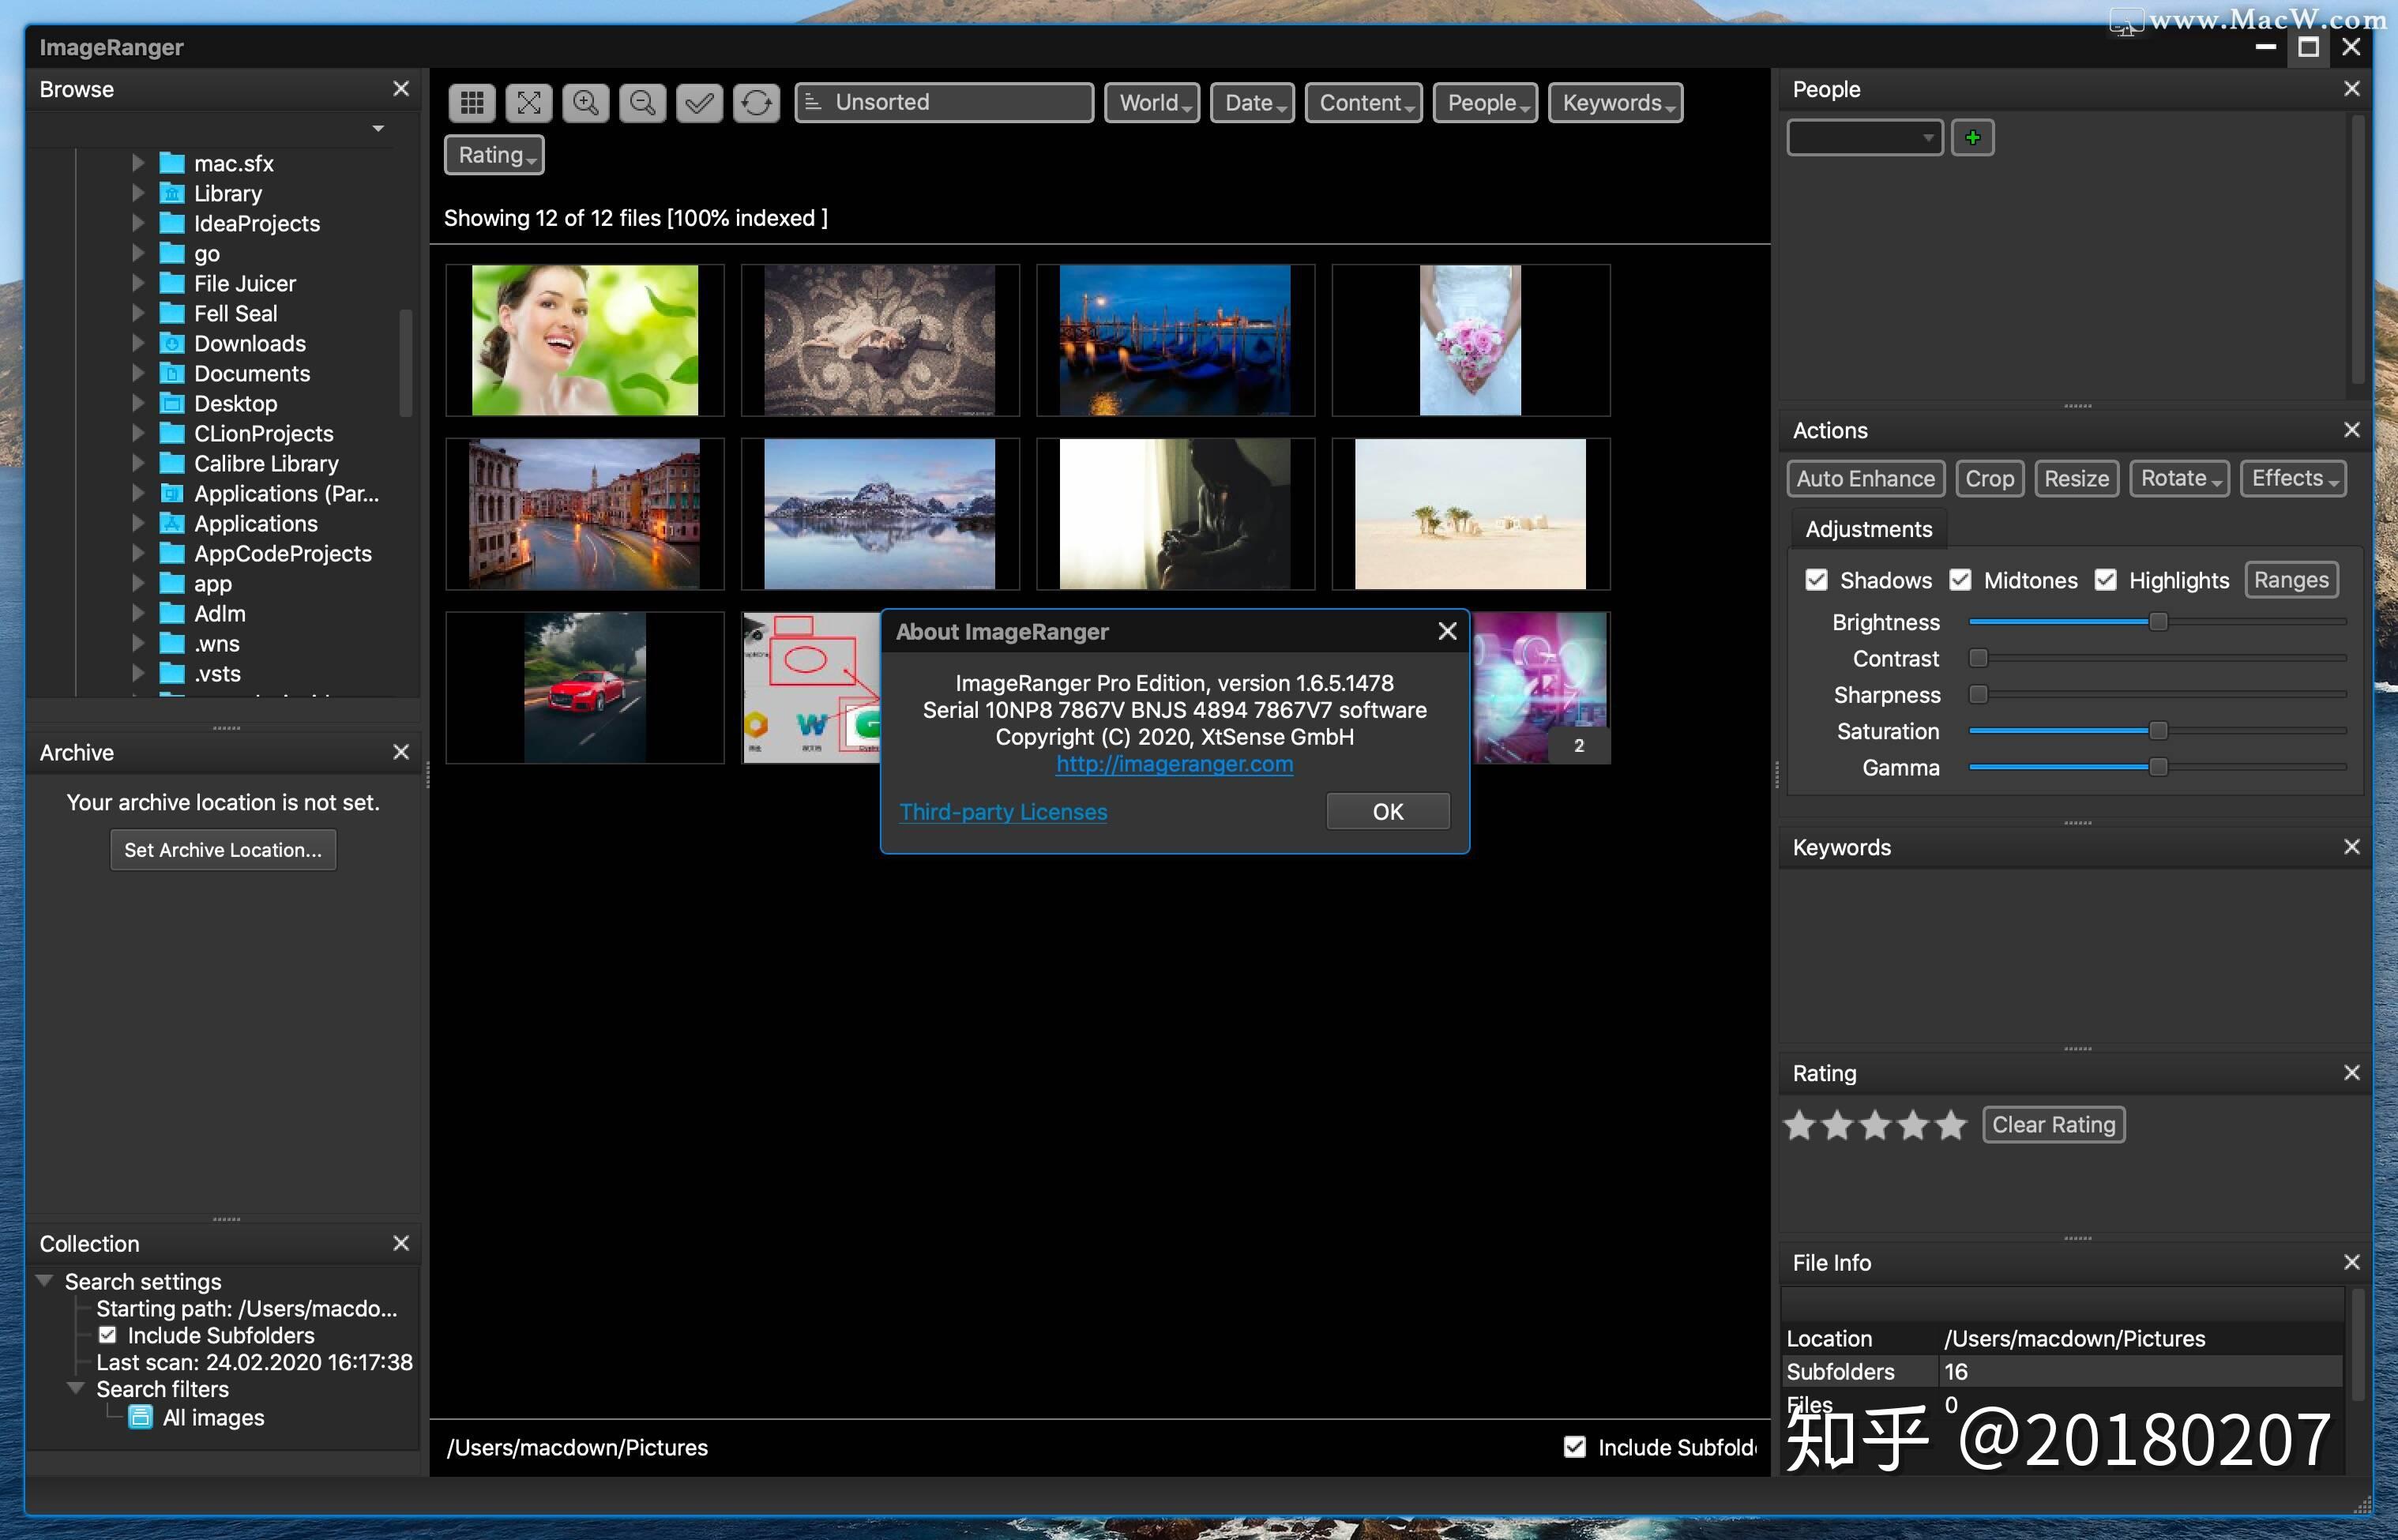 download the new version for apple ImageRanger Pro Edition 1.9.4.1865